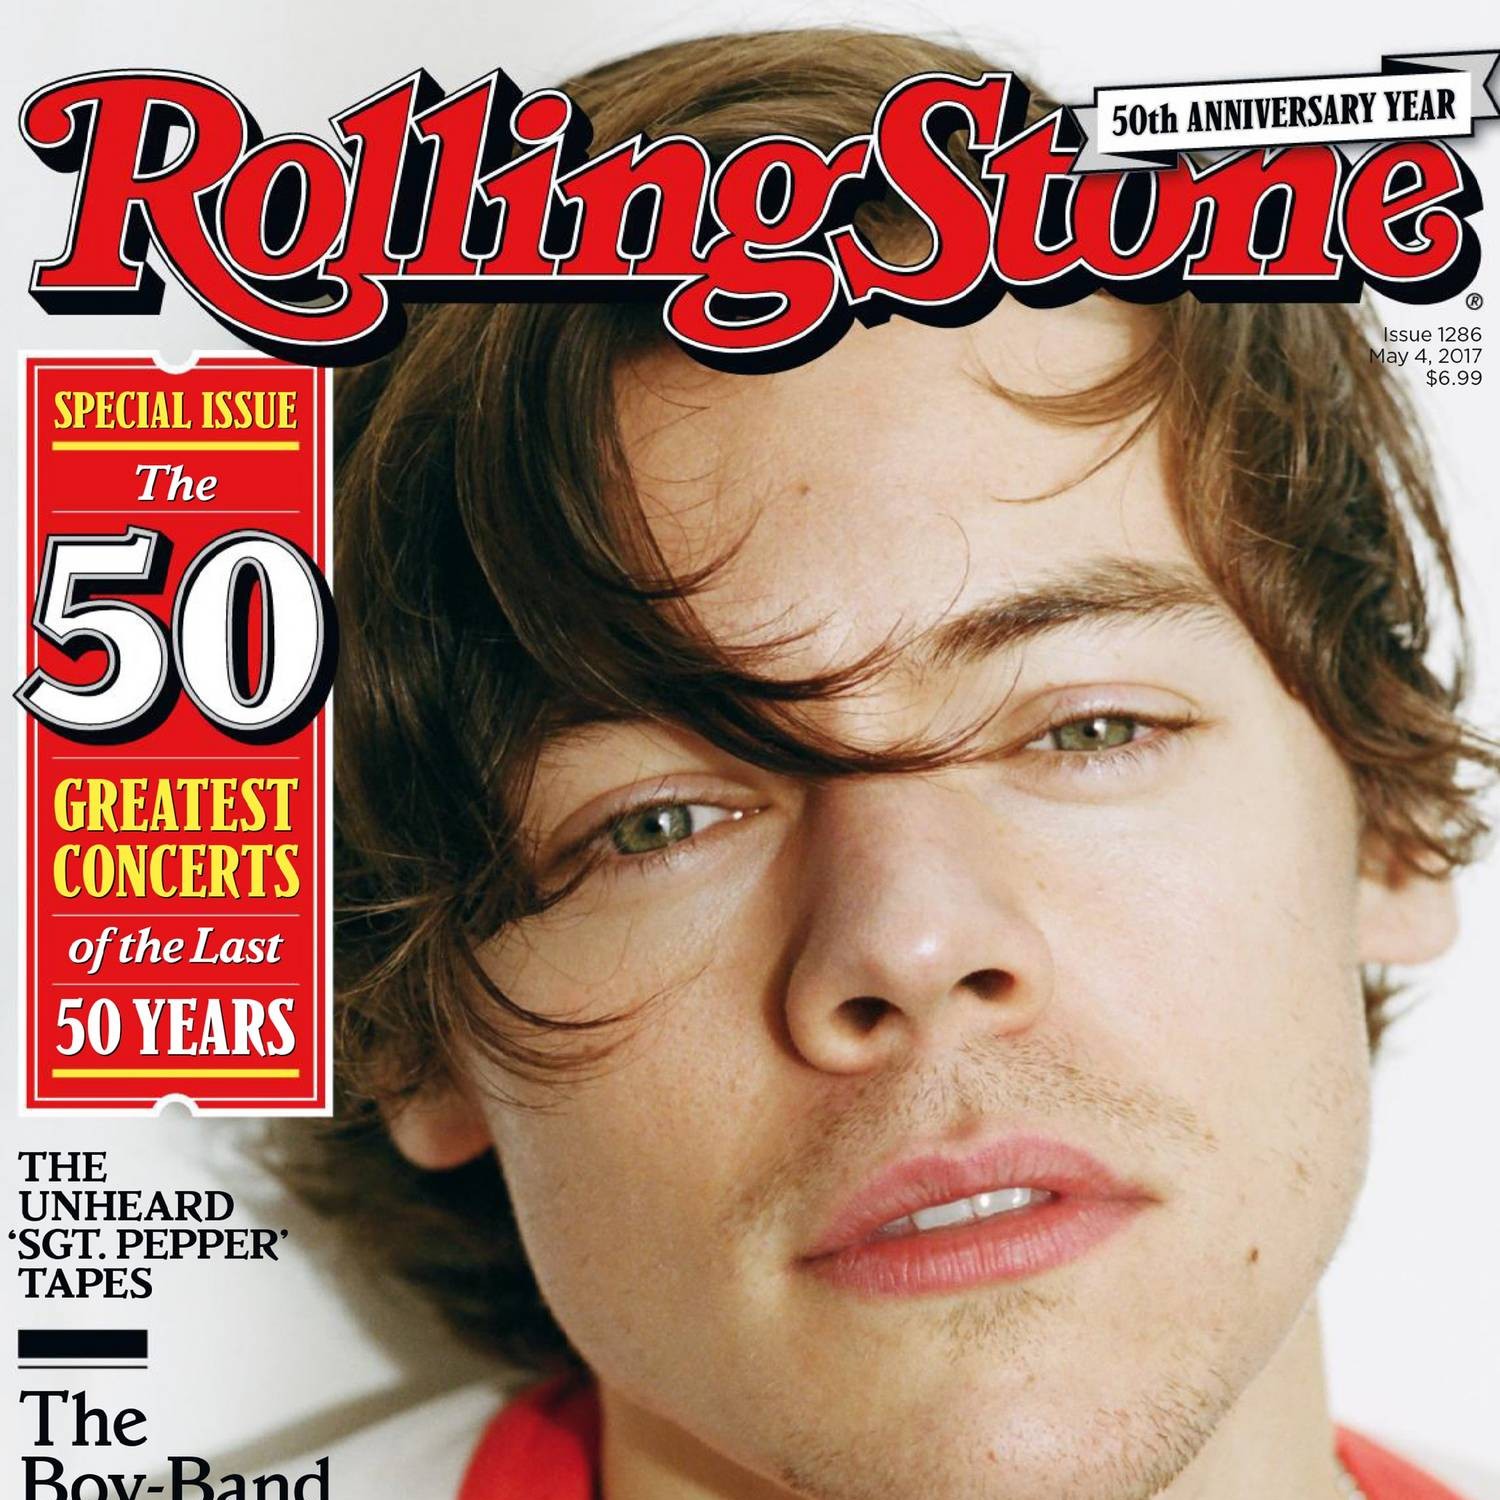 download harry styles rolling stone 2022